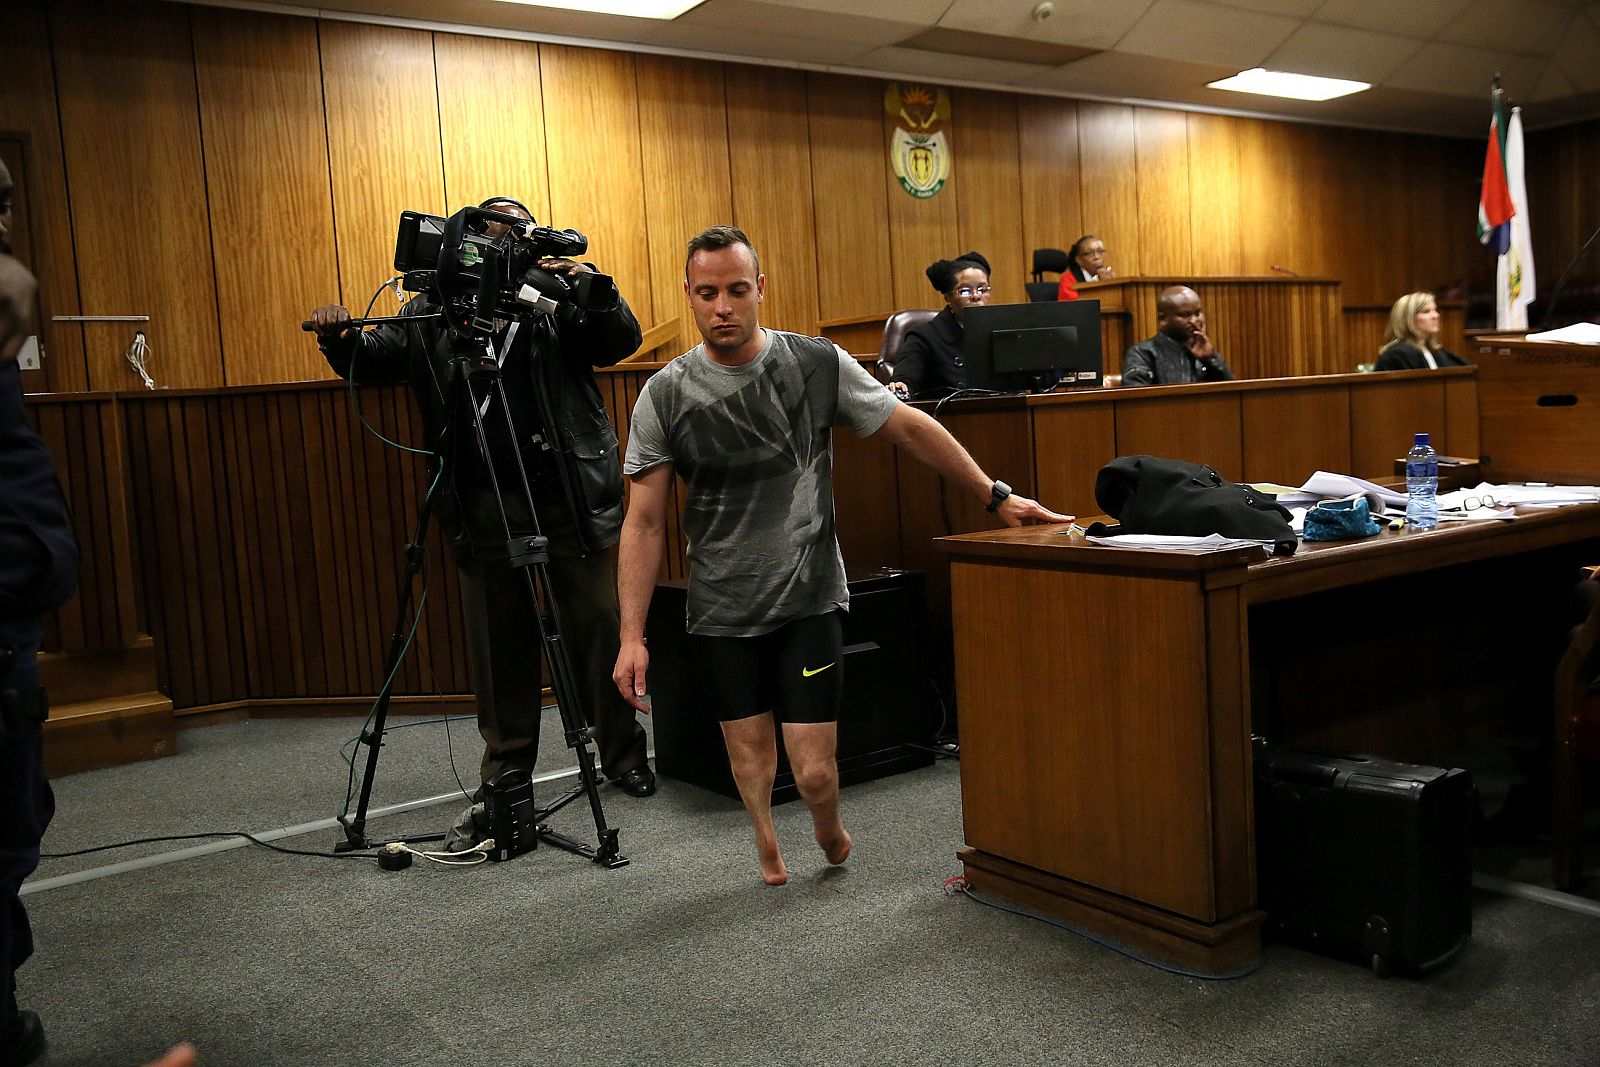 Paralympic gold medalist Oscar Pistorius walks across the courtroom without his prosthetic legs during the third day of his resentencing hearing for the 2013 murder of his girlfriend Reeva Steenkamp